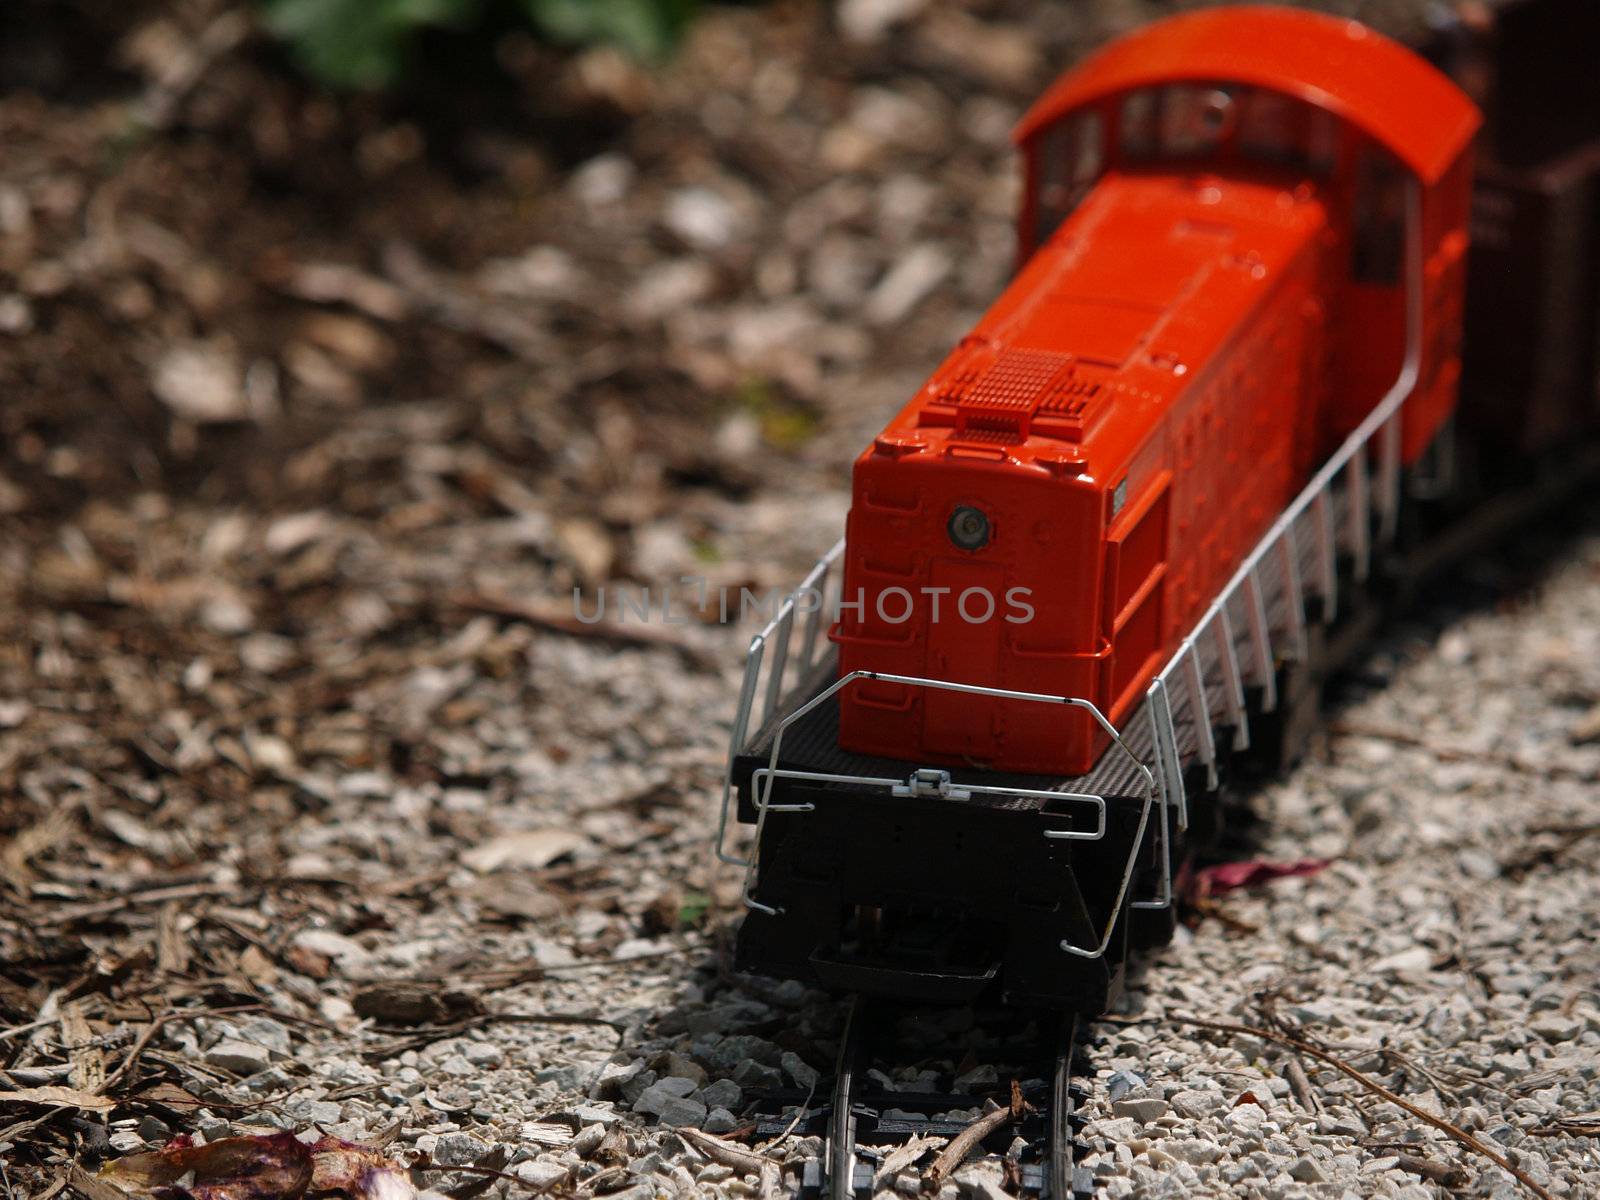 Toy Trian by vincentnotes